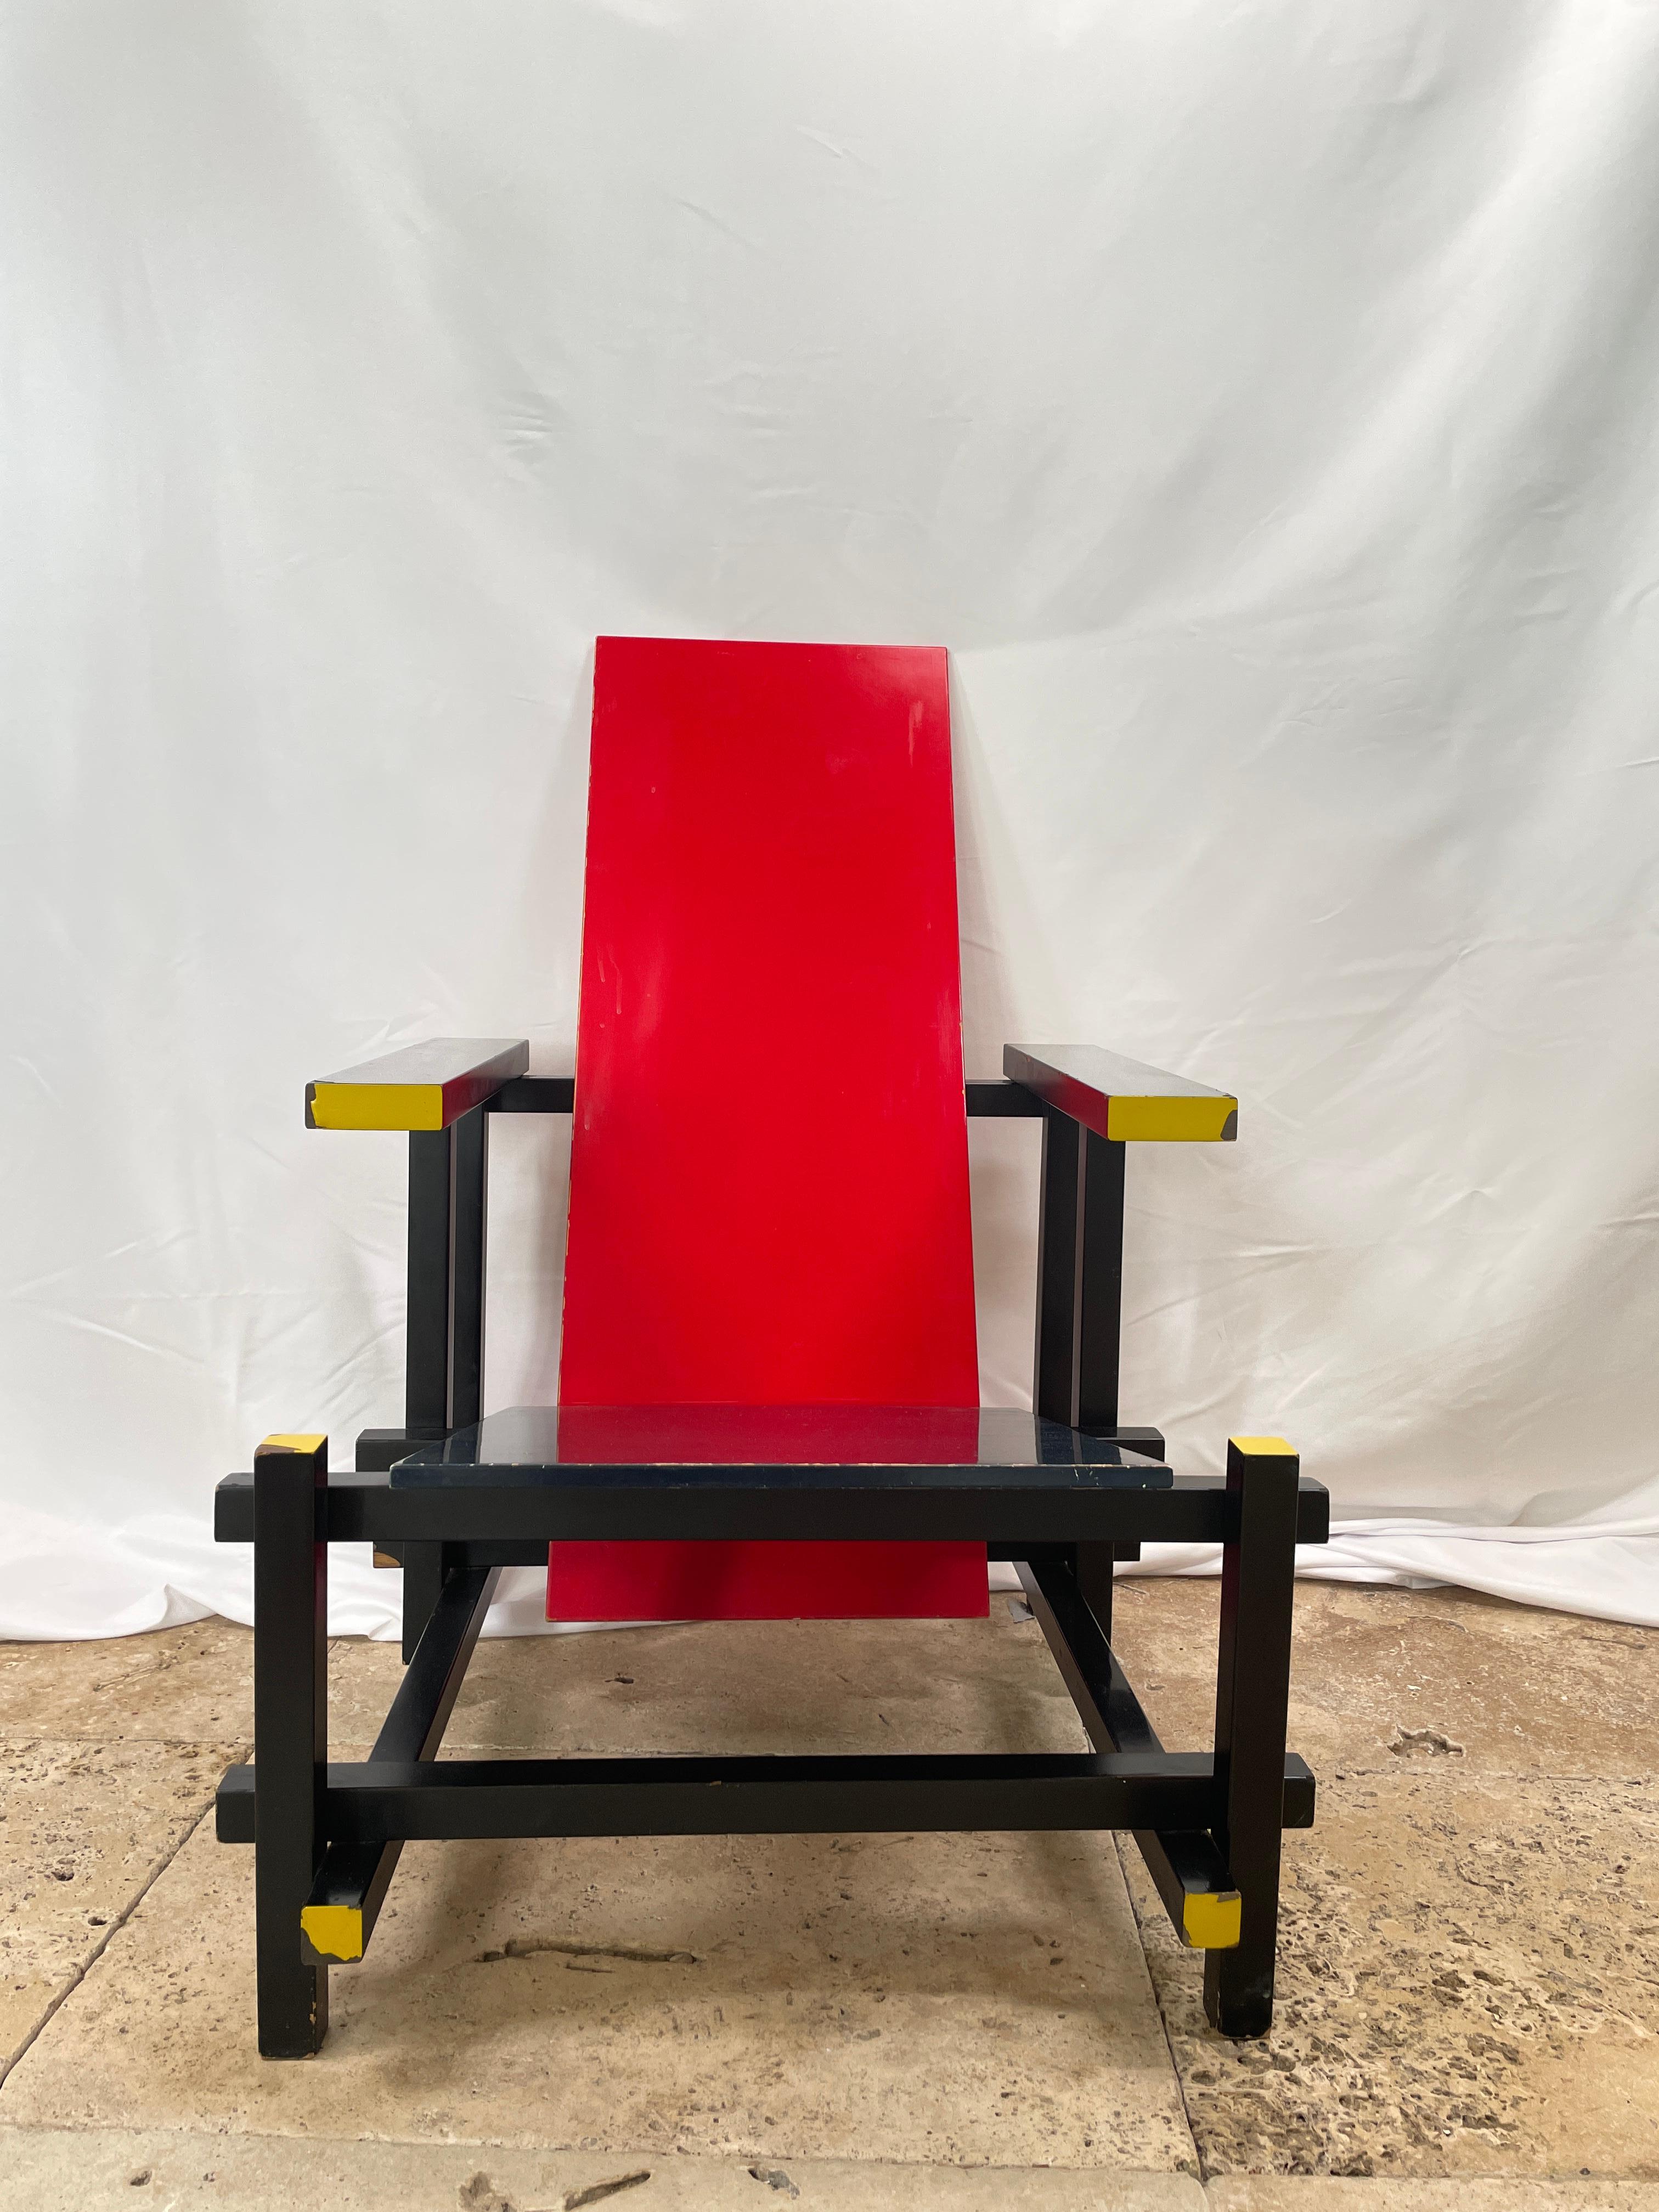 The Red and Blue Chair is a chair designed in 1917 by Gerrit Rietveld. It represents one of the first explorations by the De Stijl art movement in three dimensions.

The original chair was constructed of unstained beech wood and was not painted